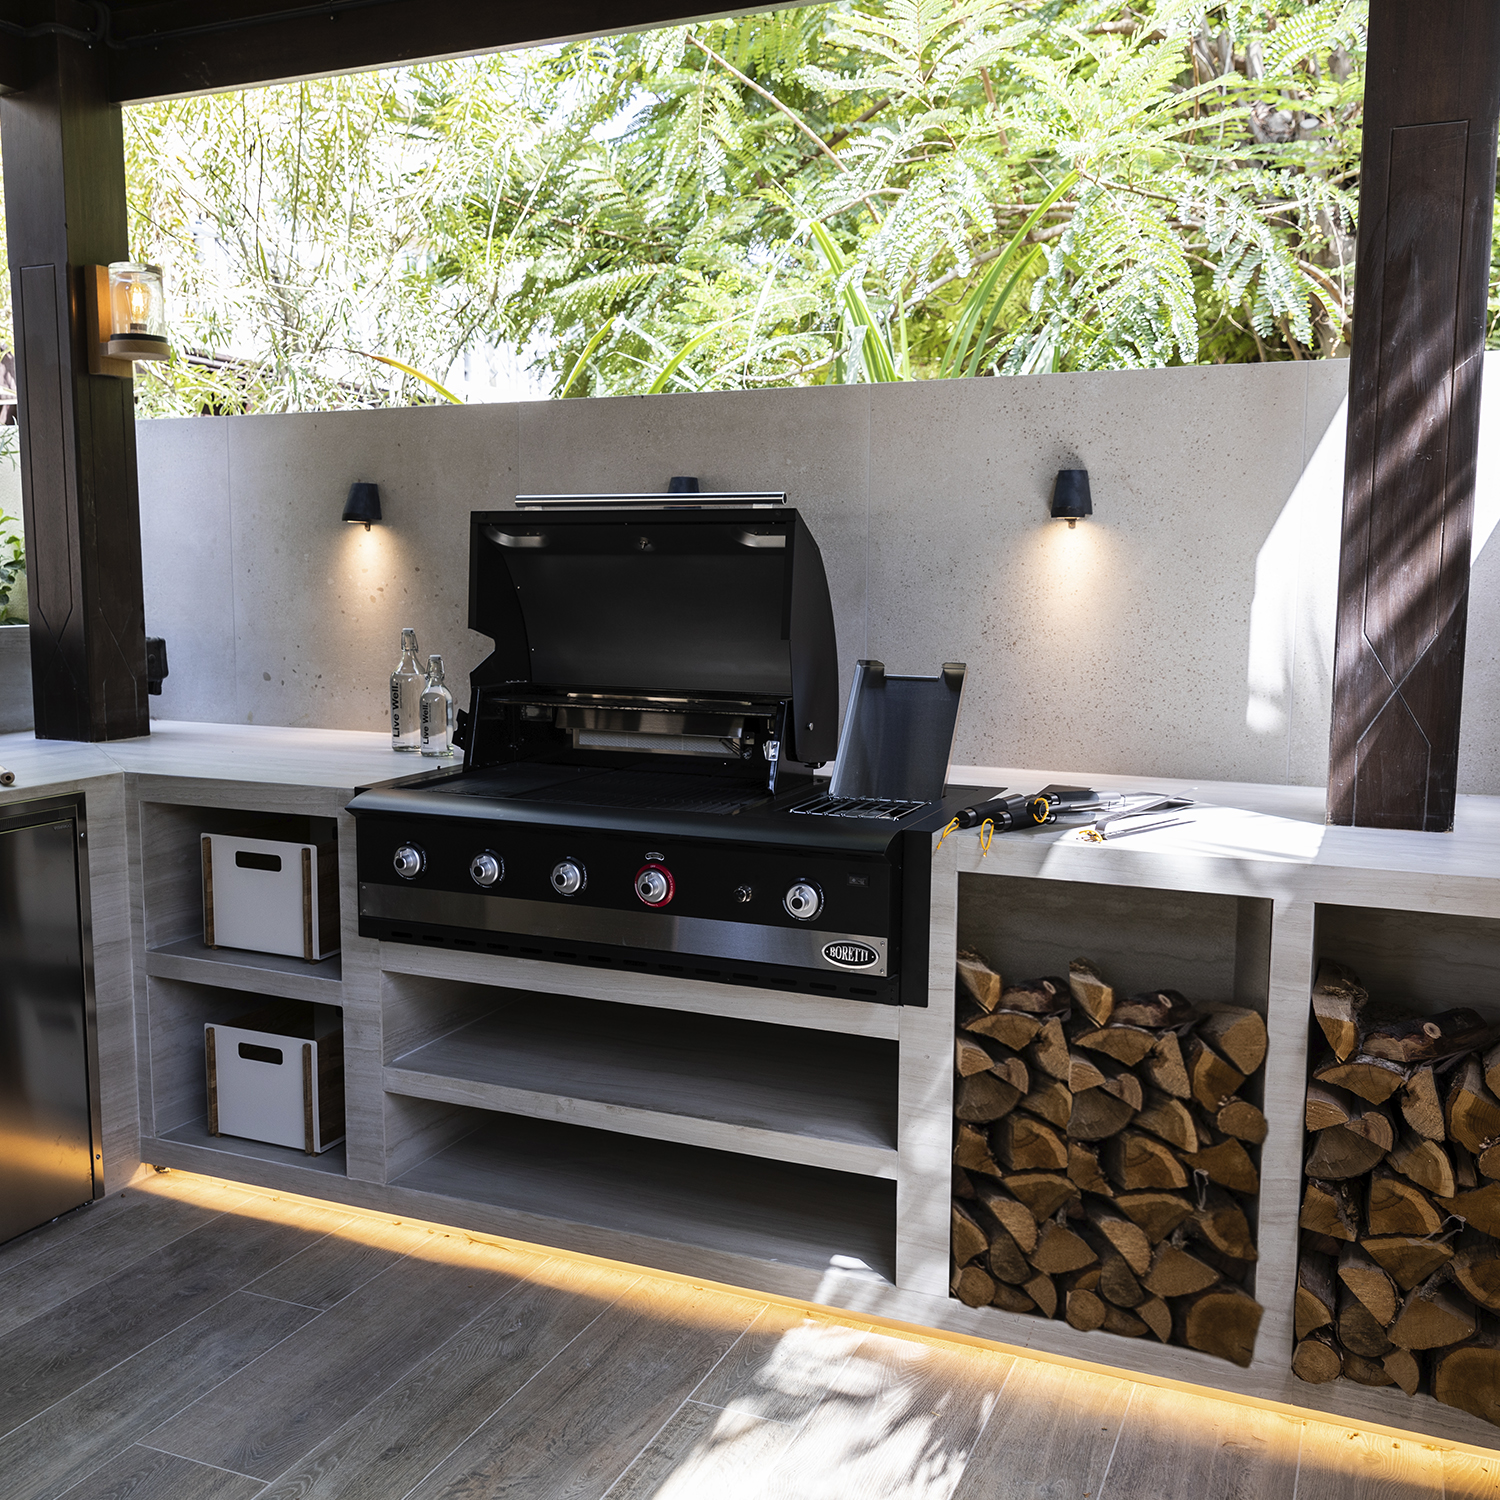 Snor Ambient Kaap Sanipex Group - Ibrido Top Gas/Charcoal BBQ Global